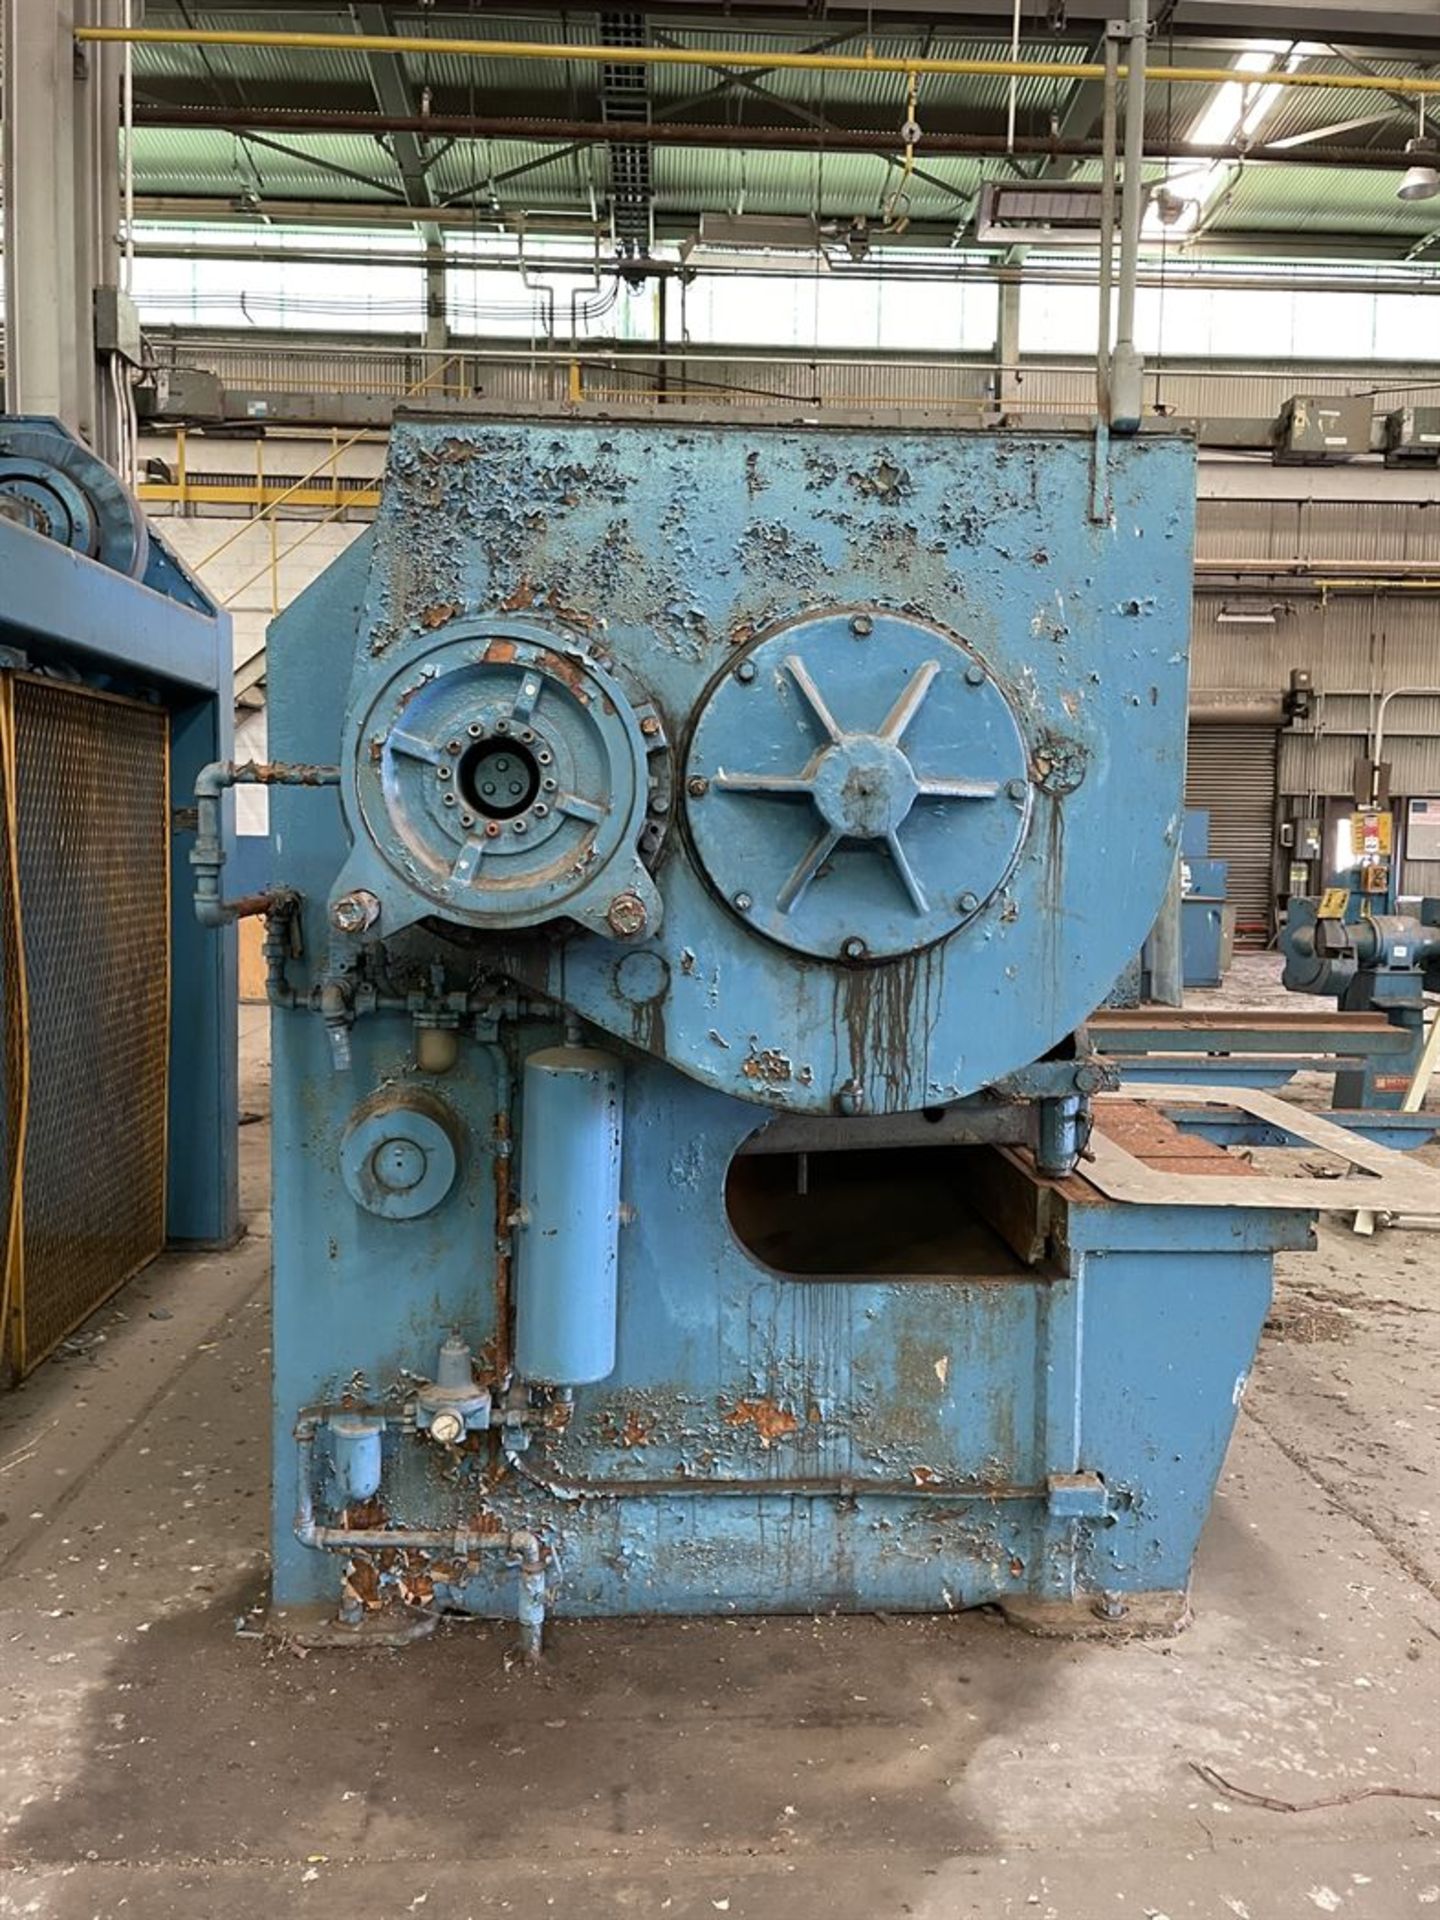 STEELWELD 4B-8 Shear, s/n M-6220, 8' x 1/4" (Condition Unknown) - Image 3 of 5